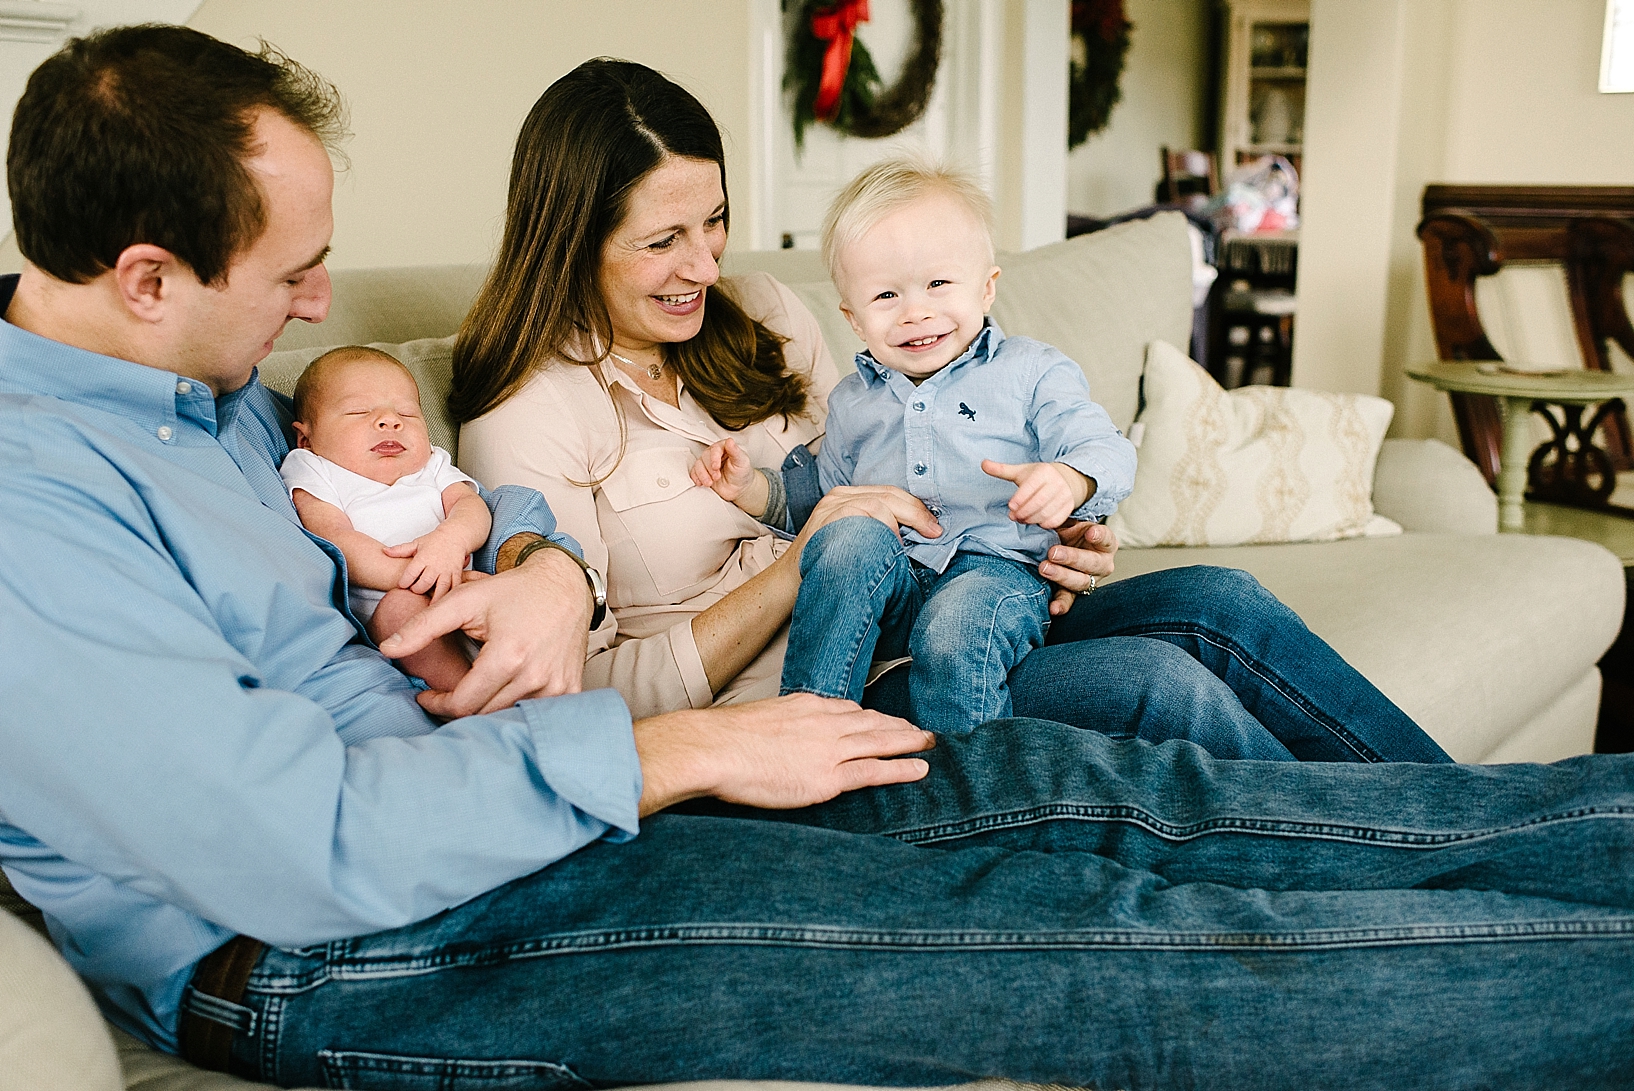 man and woman sitting on couch with toddler boy and newborn baby girl in their arms smiling